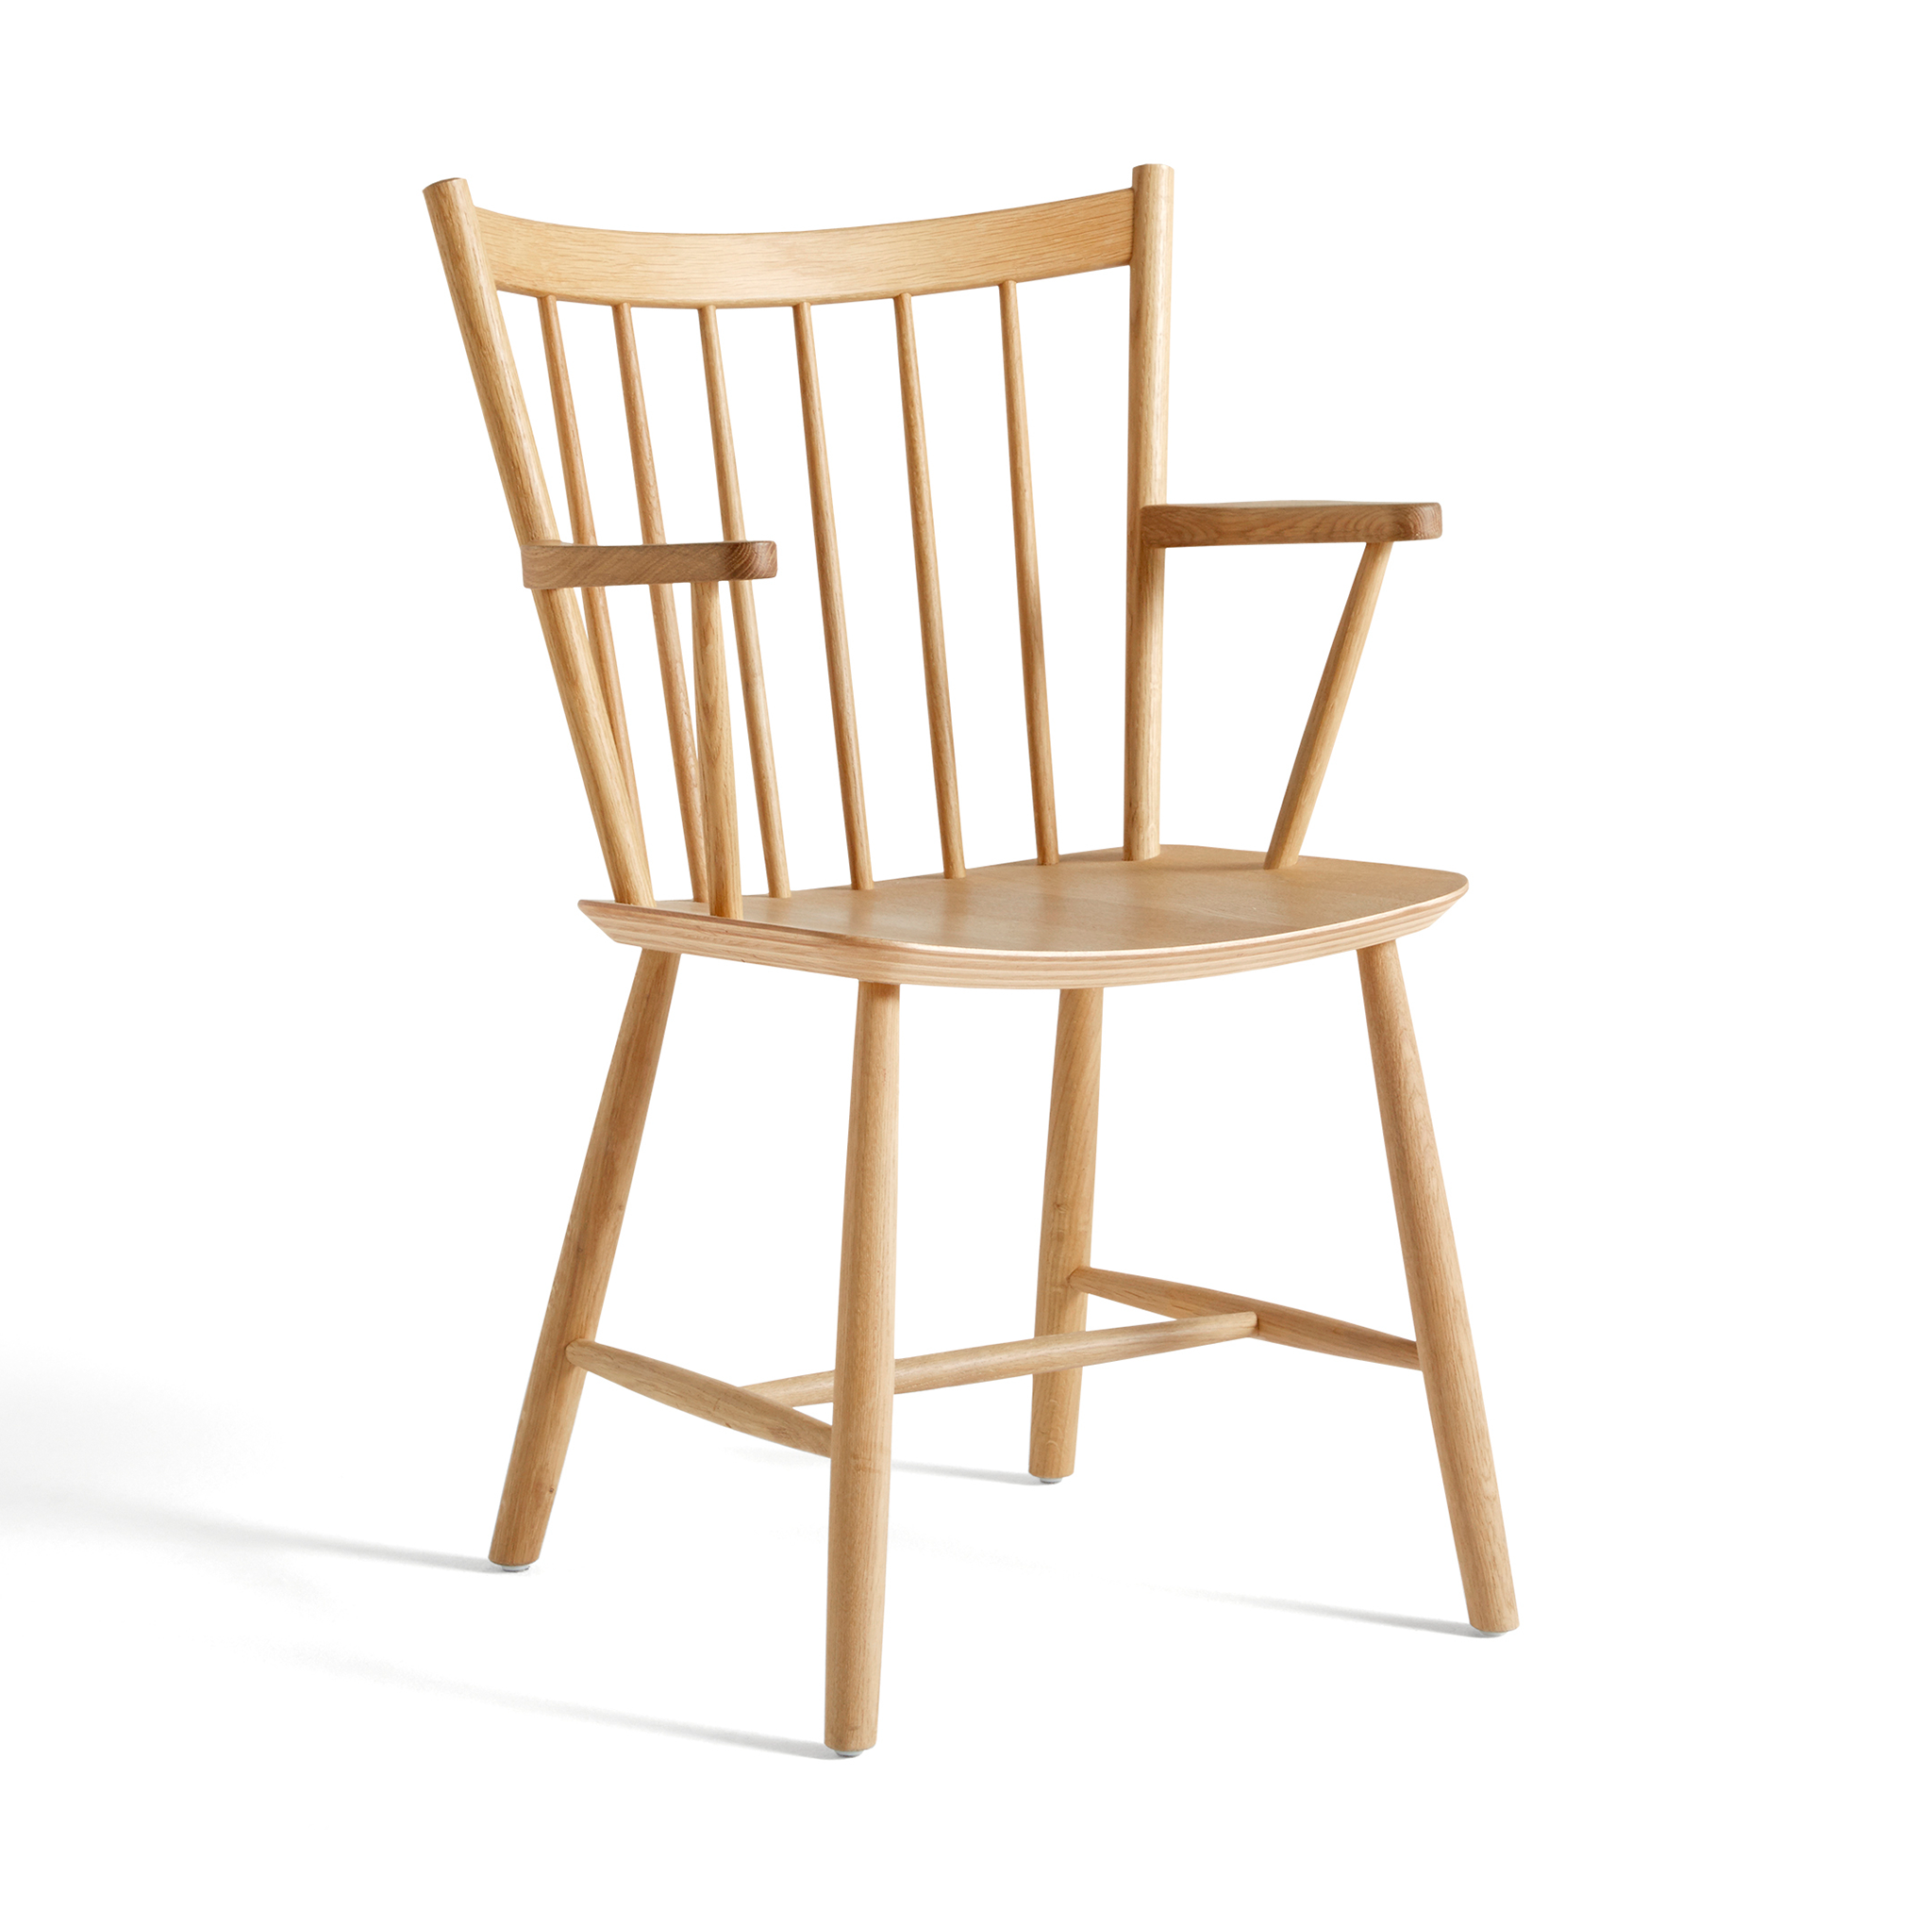 Clearance J42 Chair / Matt Lacquered Oak by Hay